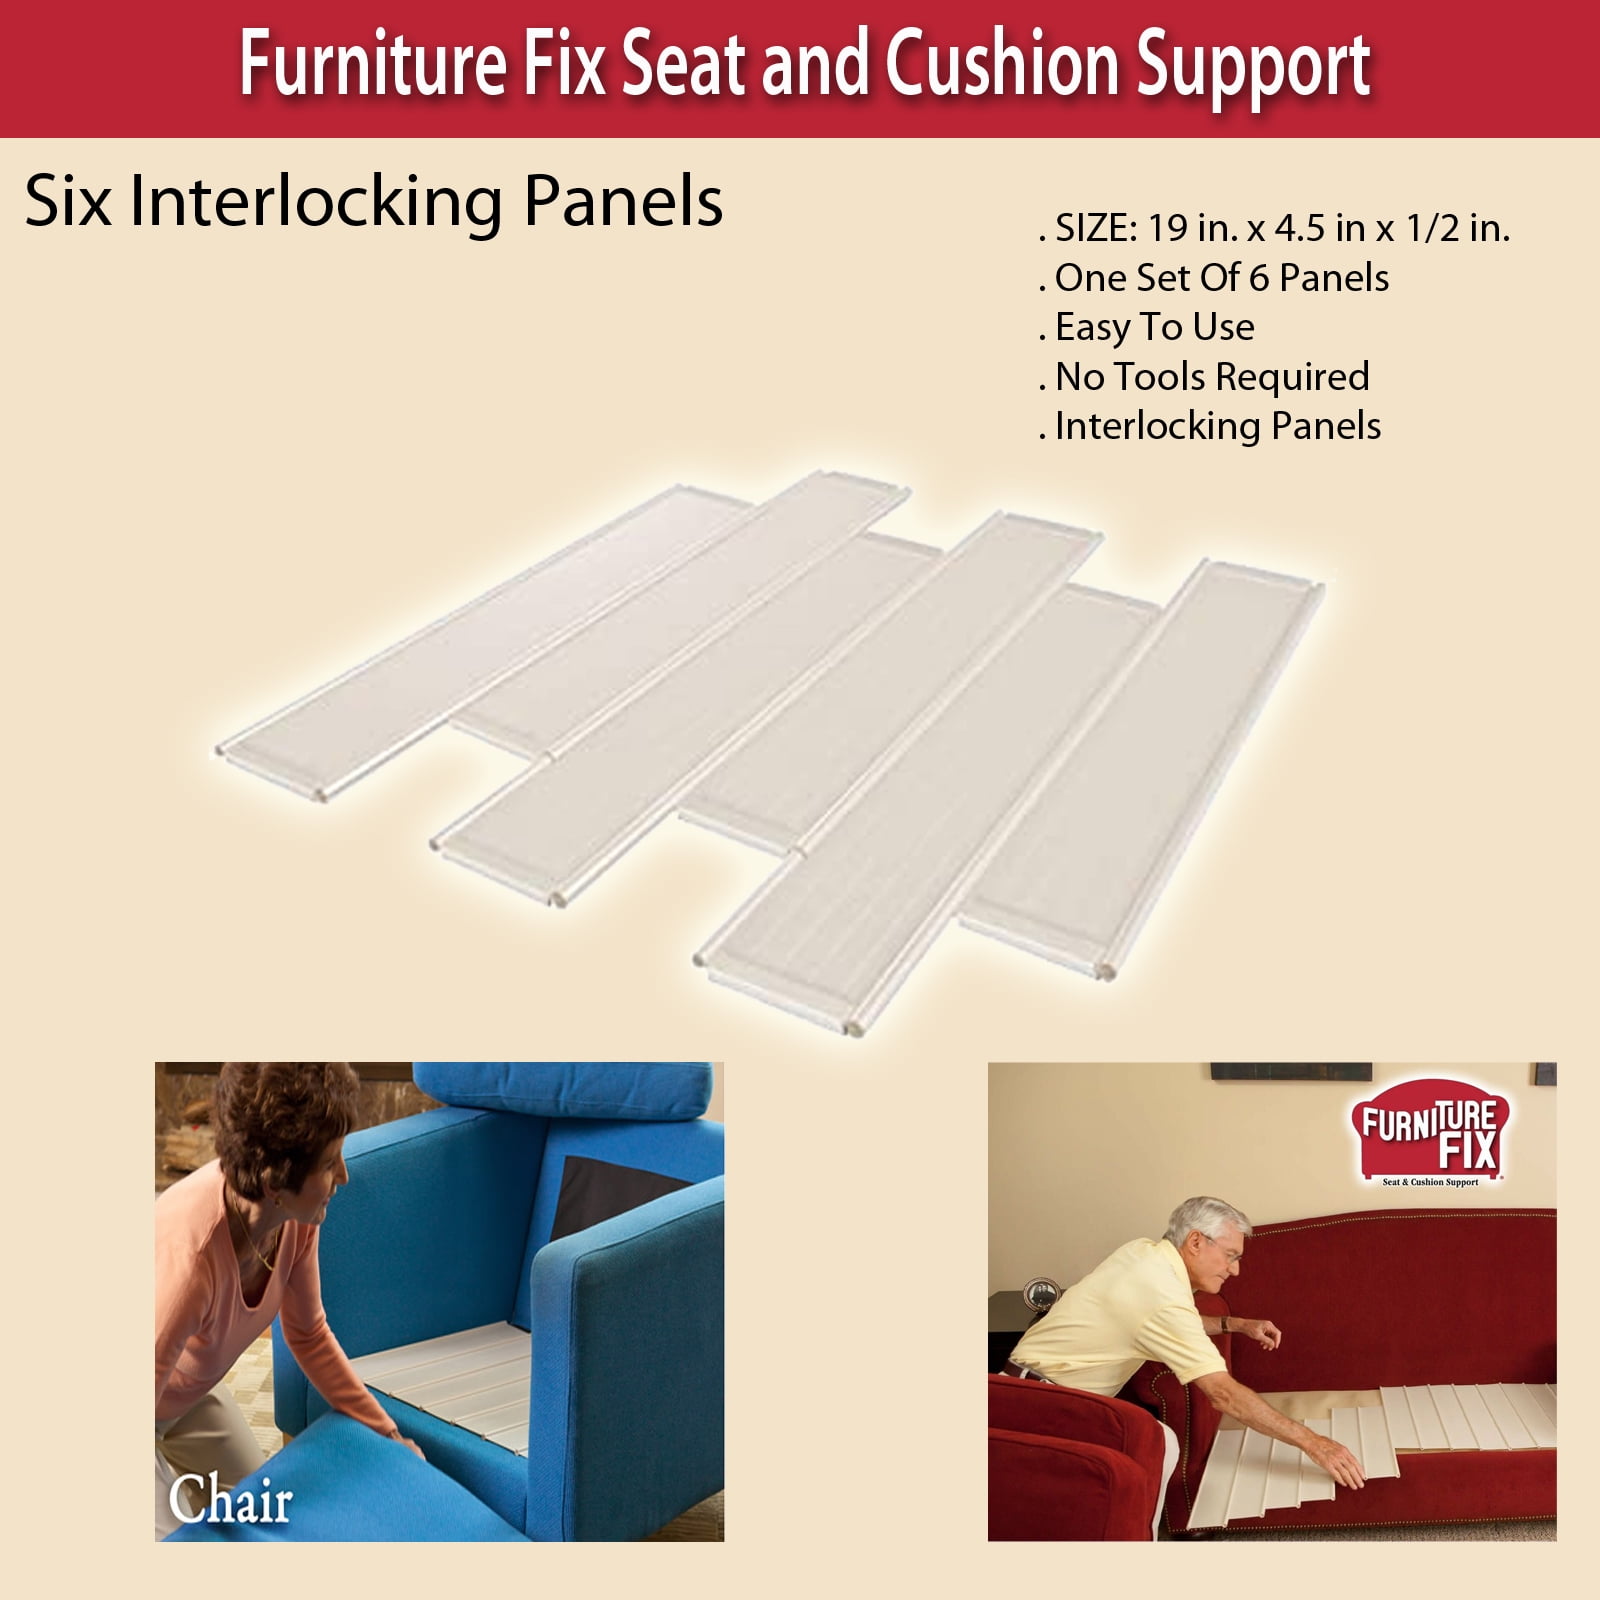 Product Trend Furniture Fix Steel for Chair, Sofa, Loveseat, Mattress, or  Couch-Cushion Support, Supercomfortable Nonslip Adjustable Seat Support